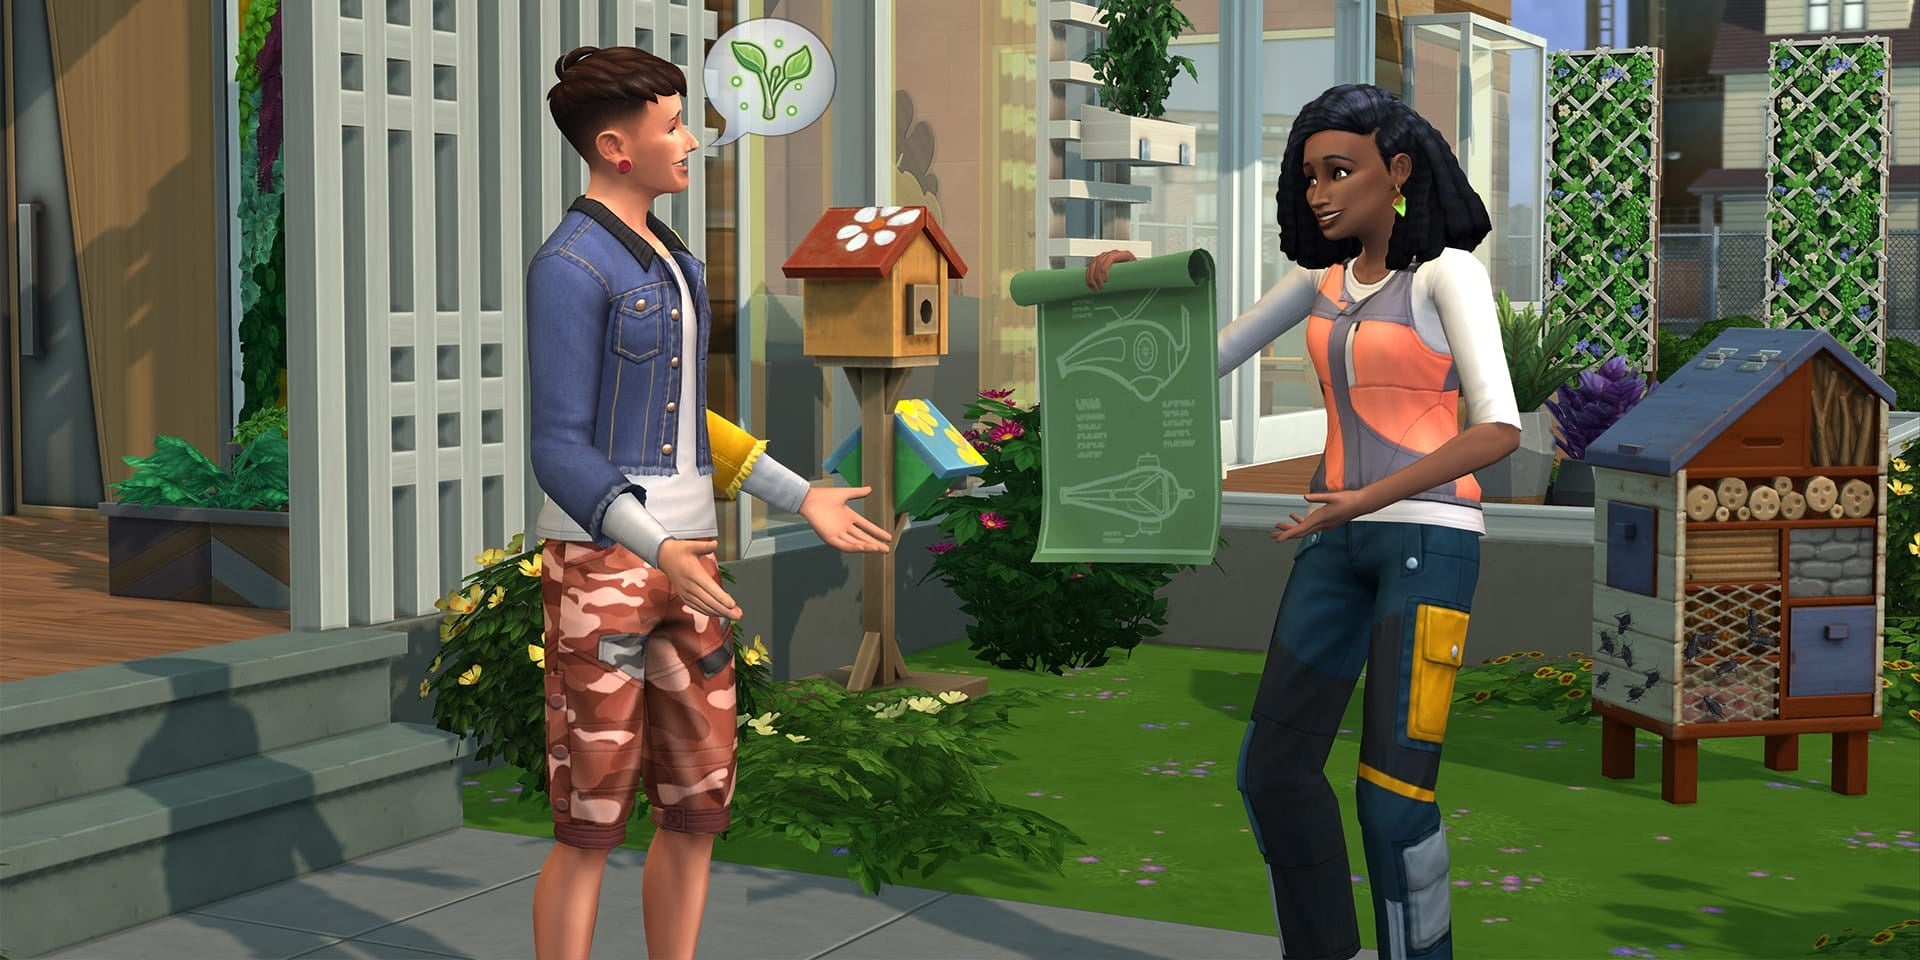 A family leads an eco lifestyle in The Sims 4.